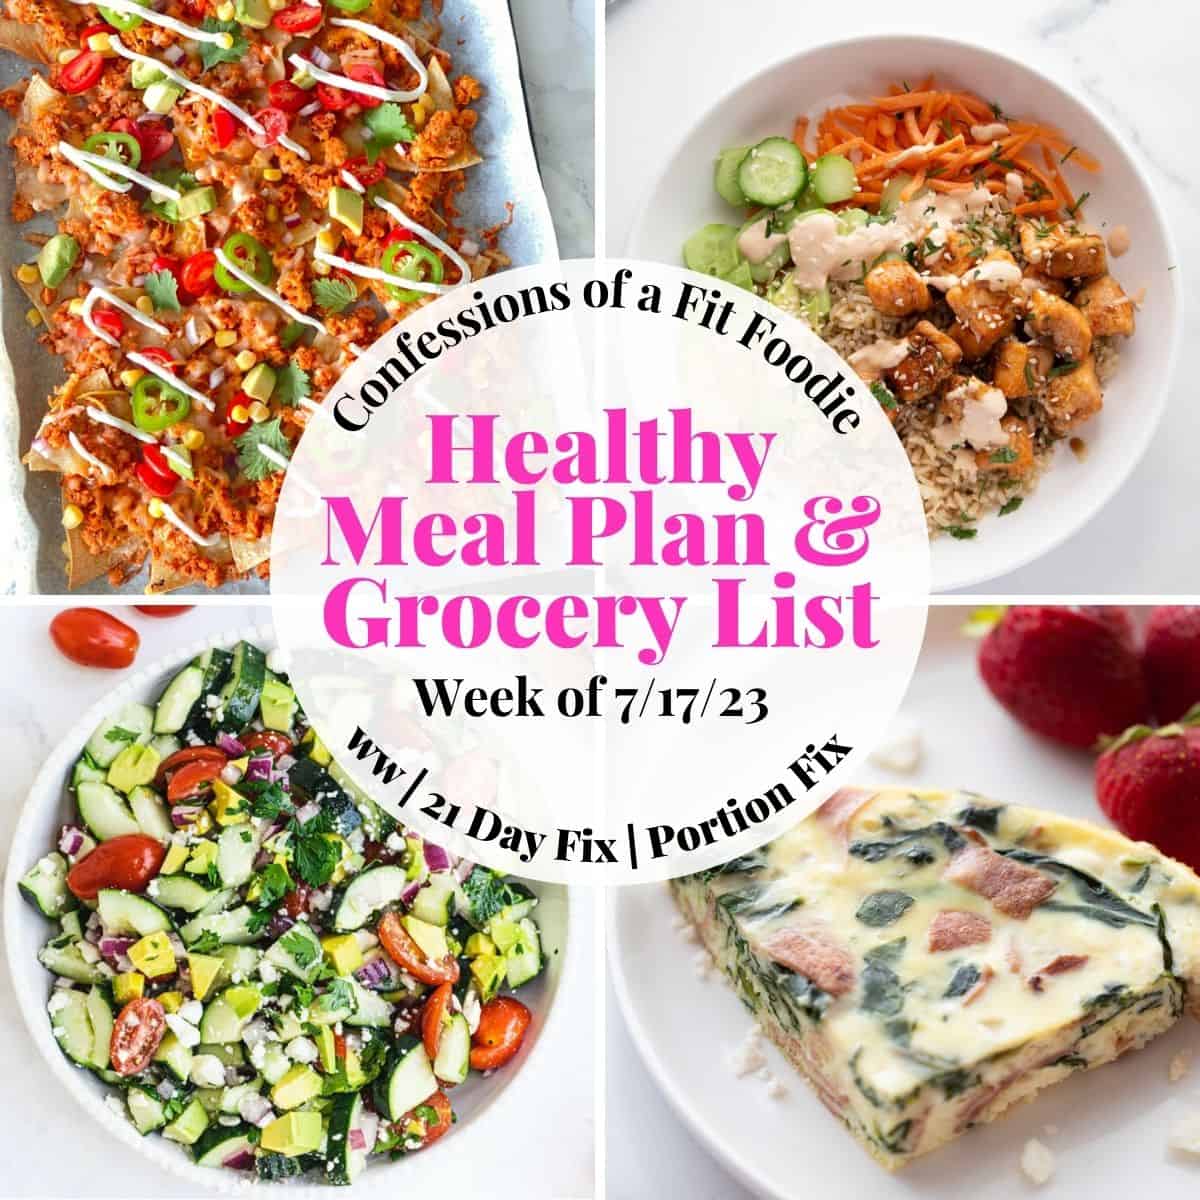 Food photo collage with pink and black text on a white circle. Text says, "Healthy Meal Plan & Grocery List Week of 7/17/23" 